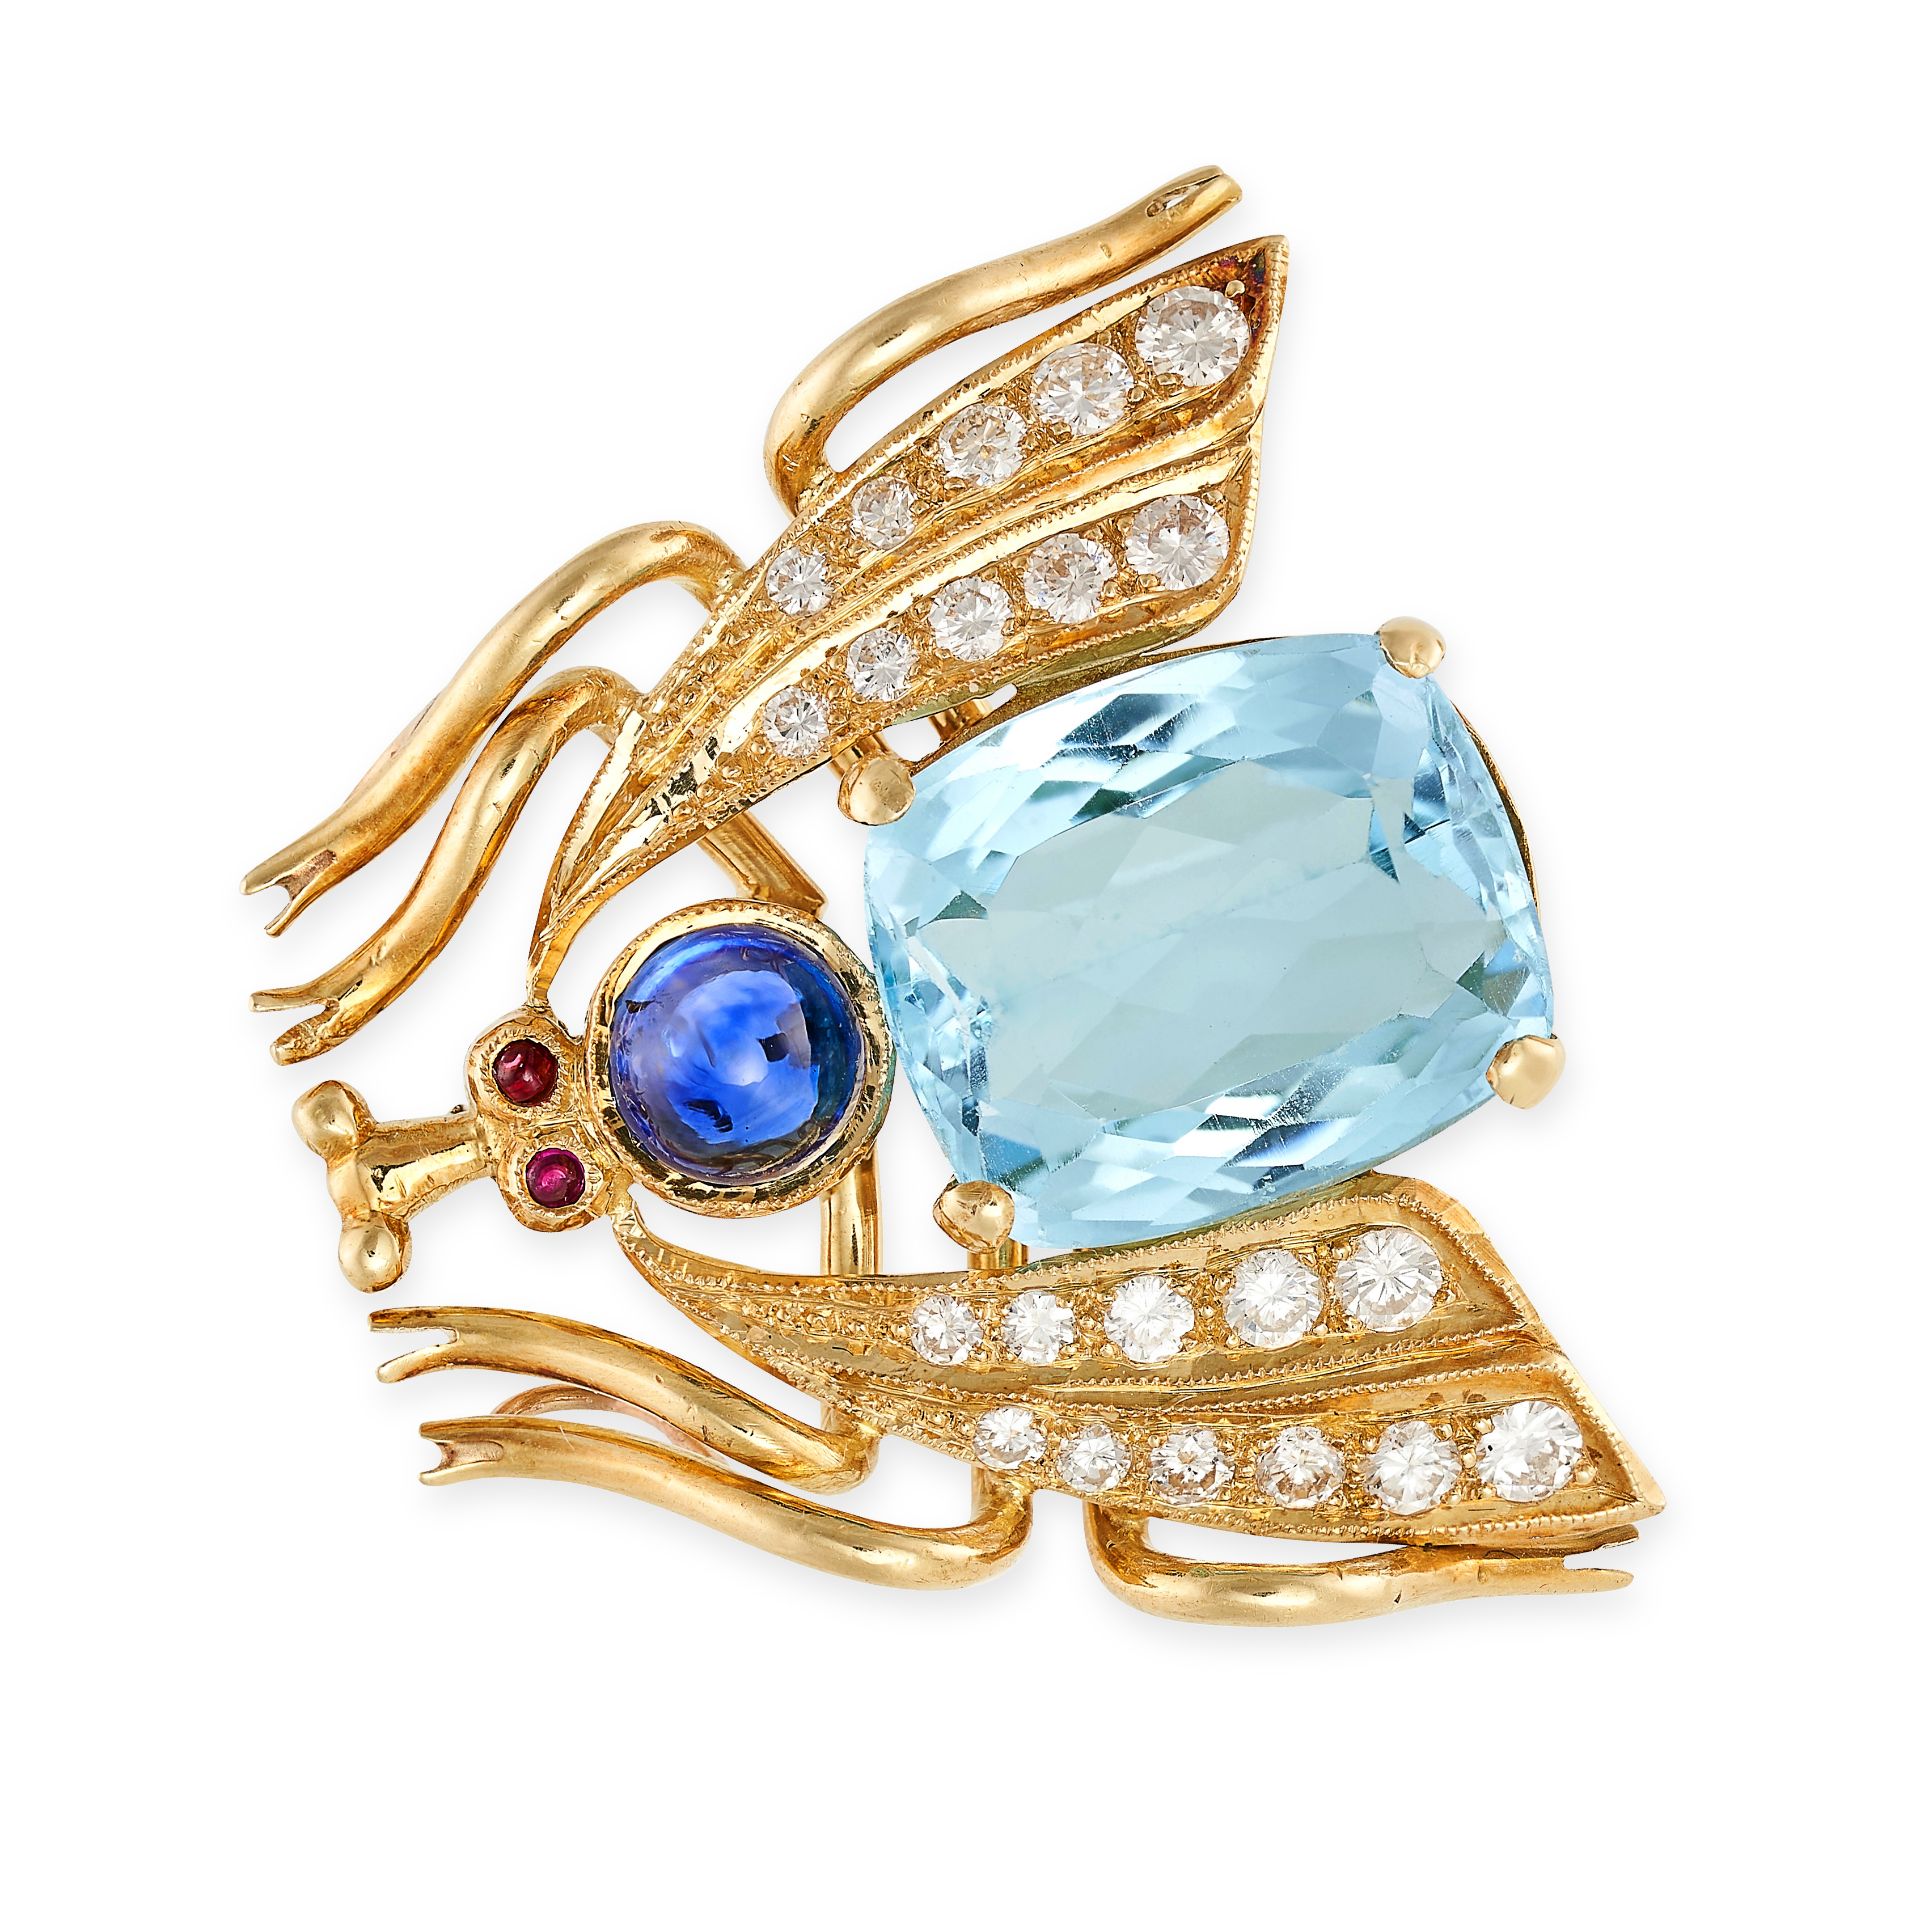 AN AQUAMARINE, SAPPHIRE AND RUBY INSECT BROOCH the body set with a cushion cut aquamarine and a